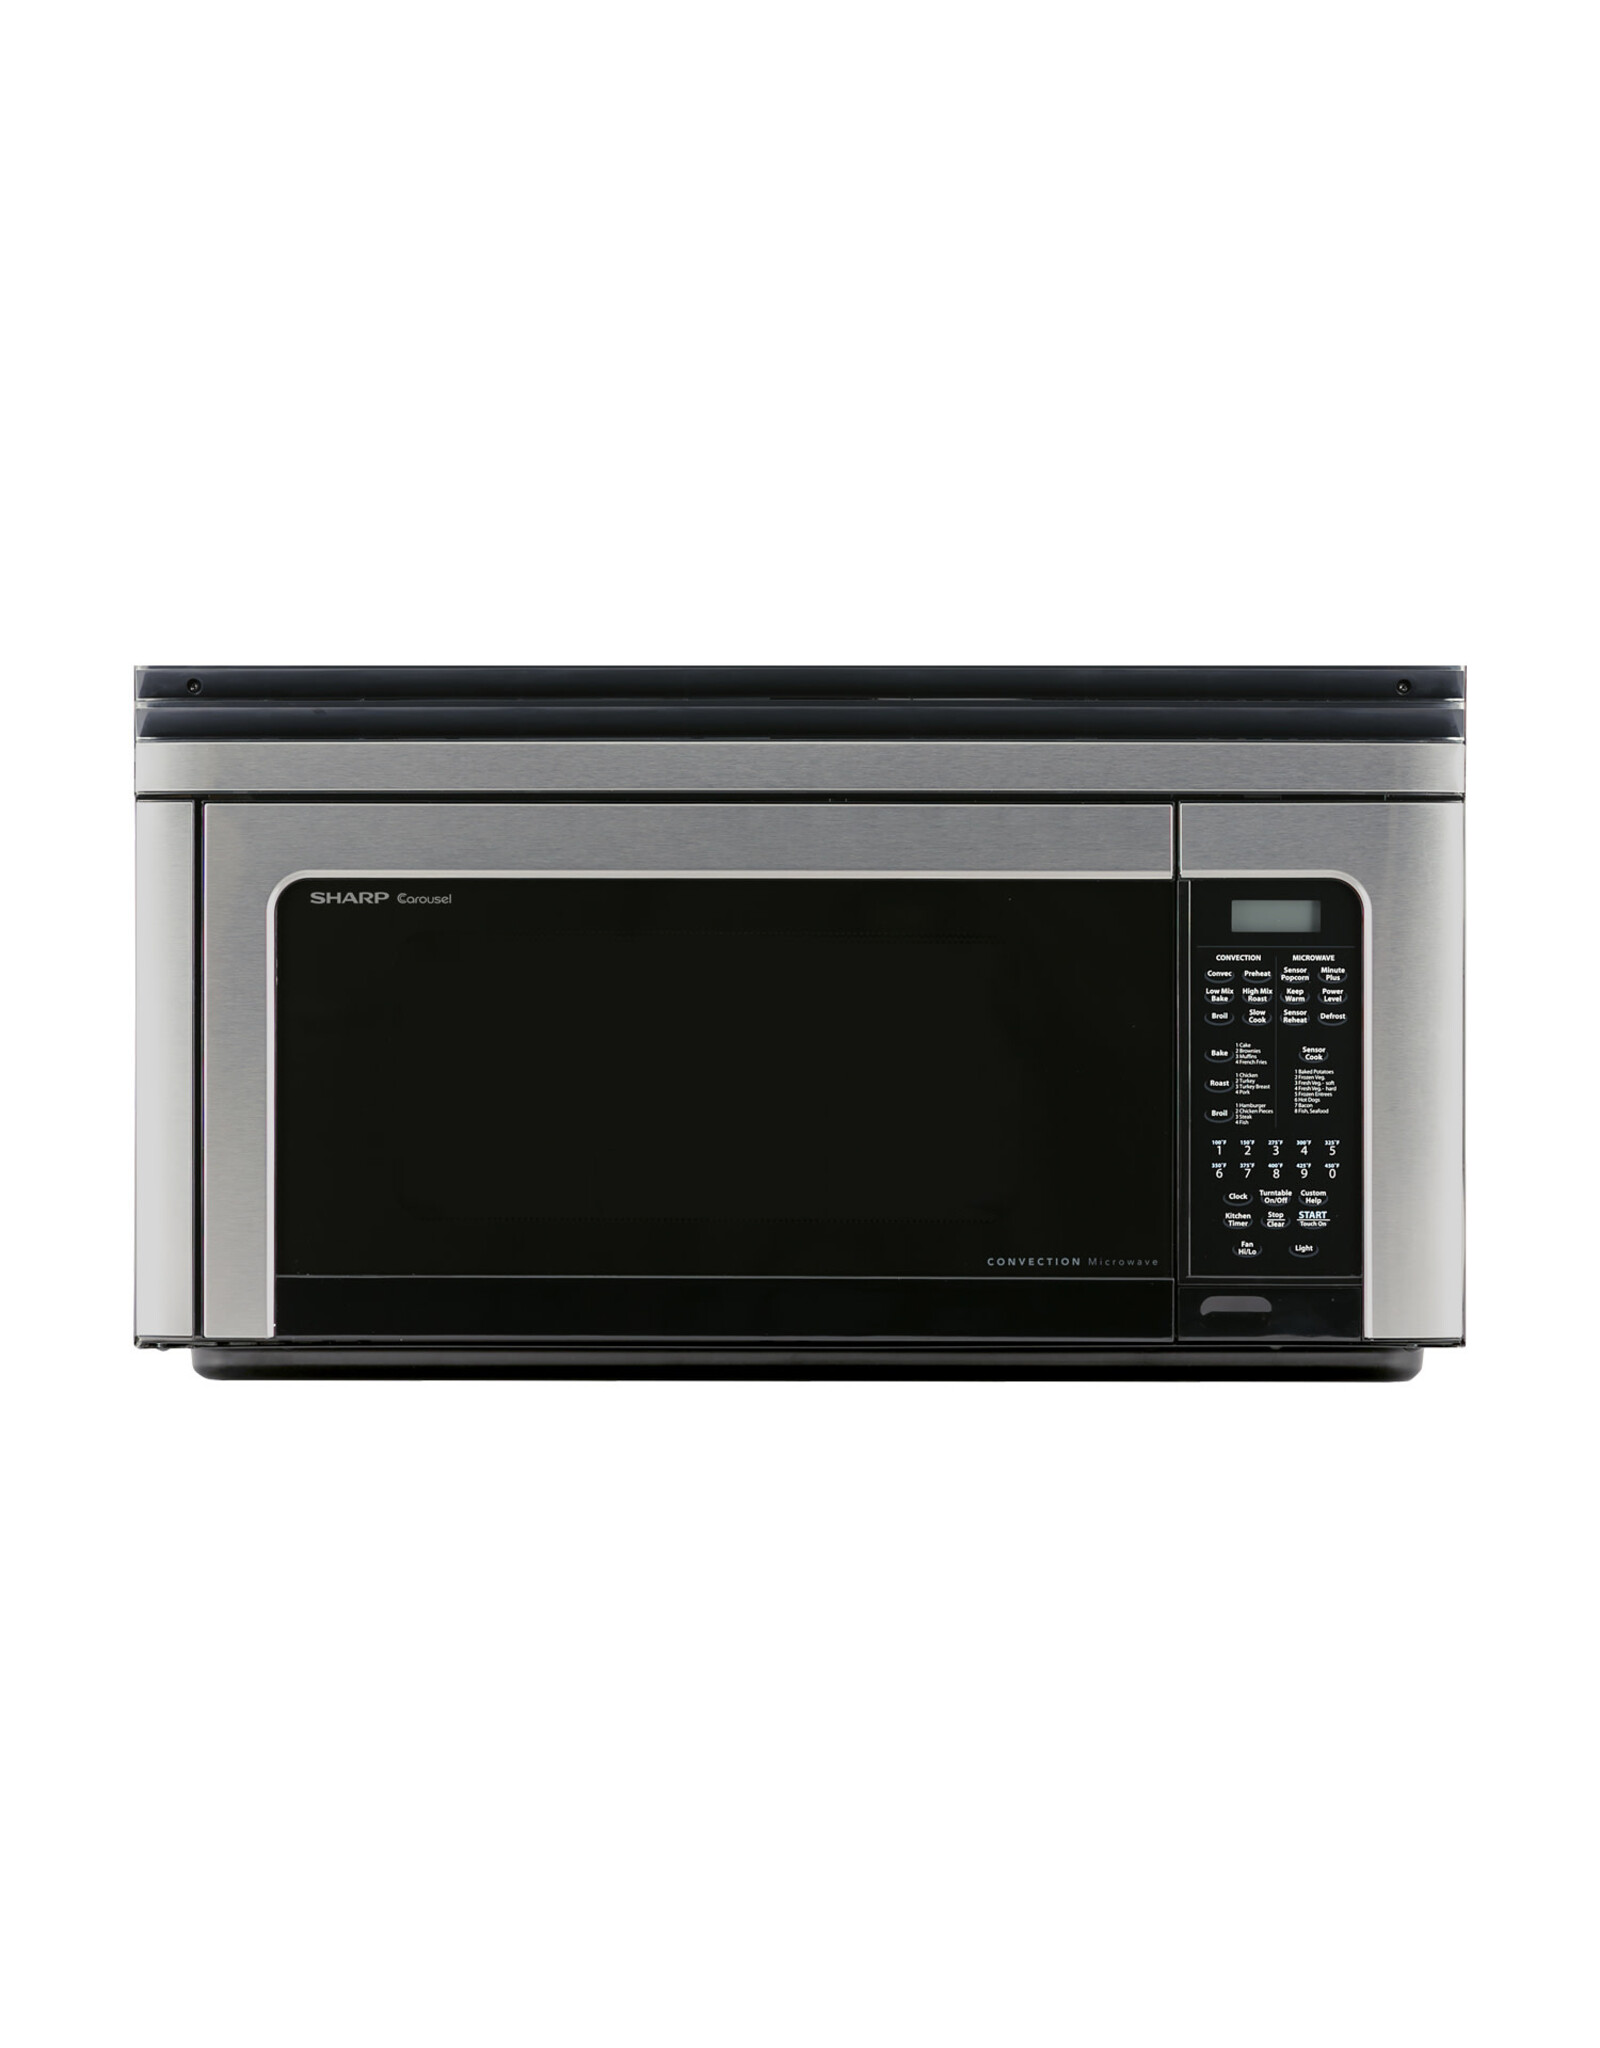 R1881LSY Sharp 1.1 cu. ft. Over-the-Range Convection Microwave Oven in Stainless Steel